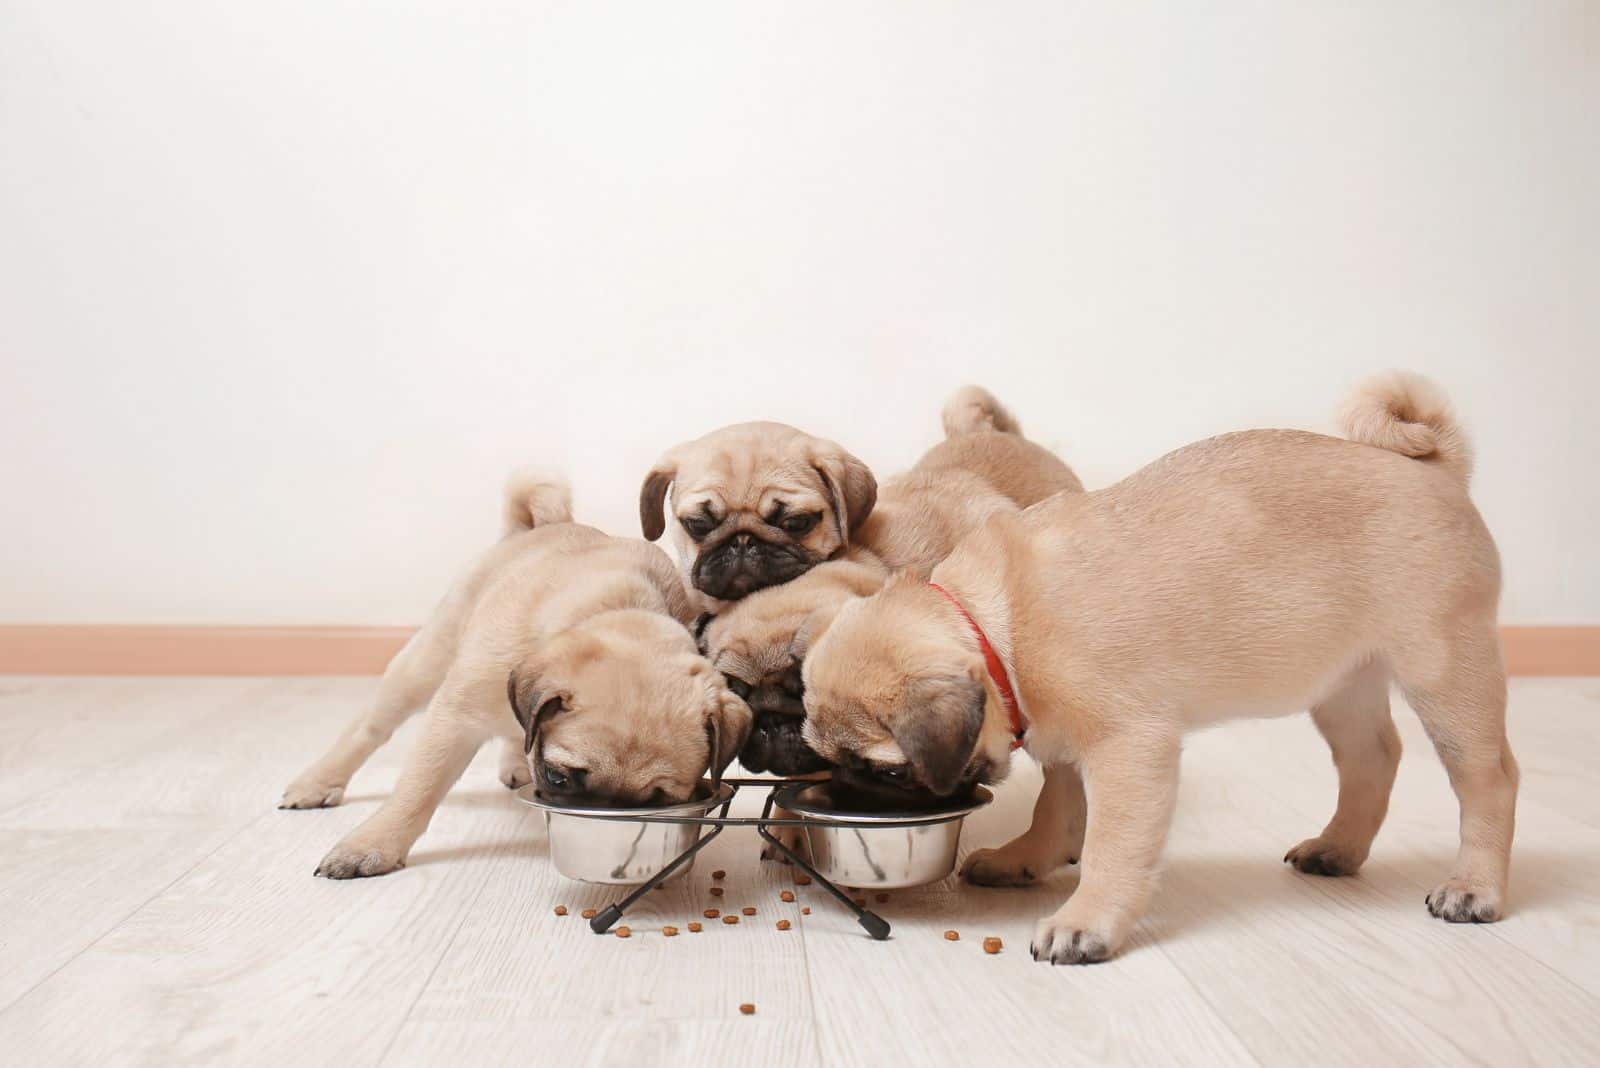 the pug always eats from a bowl